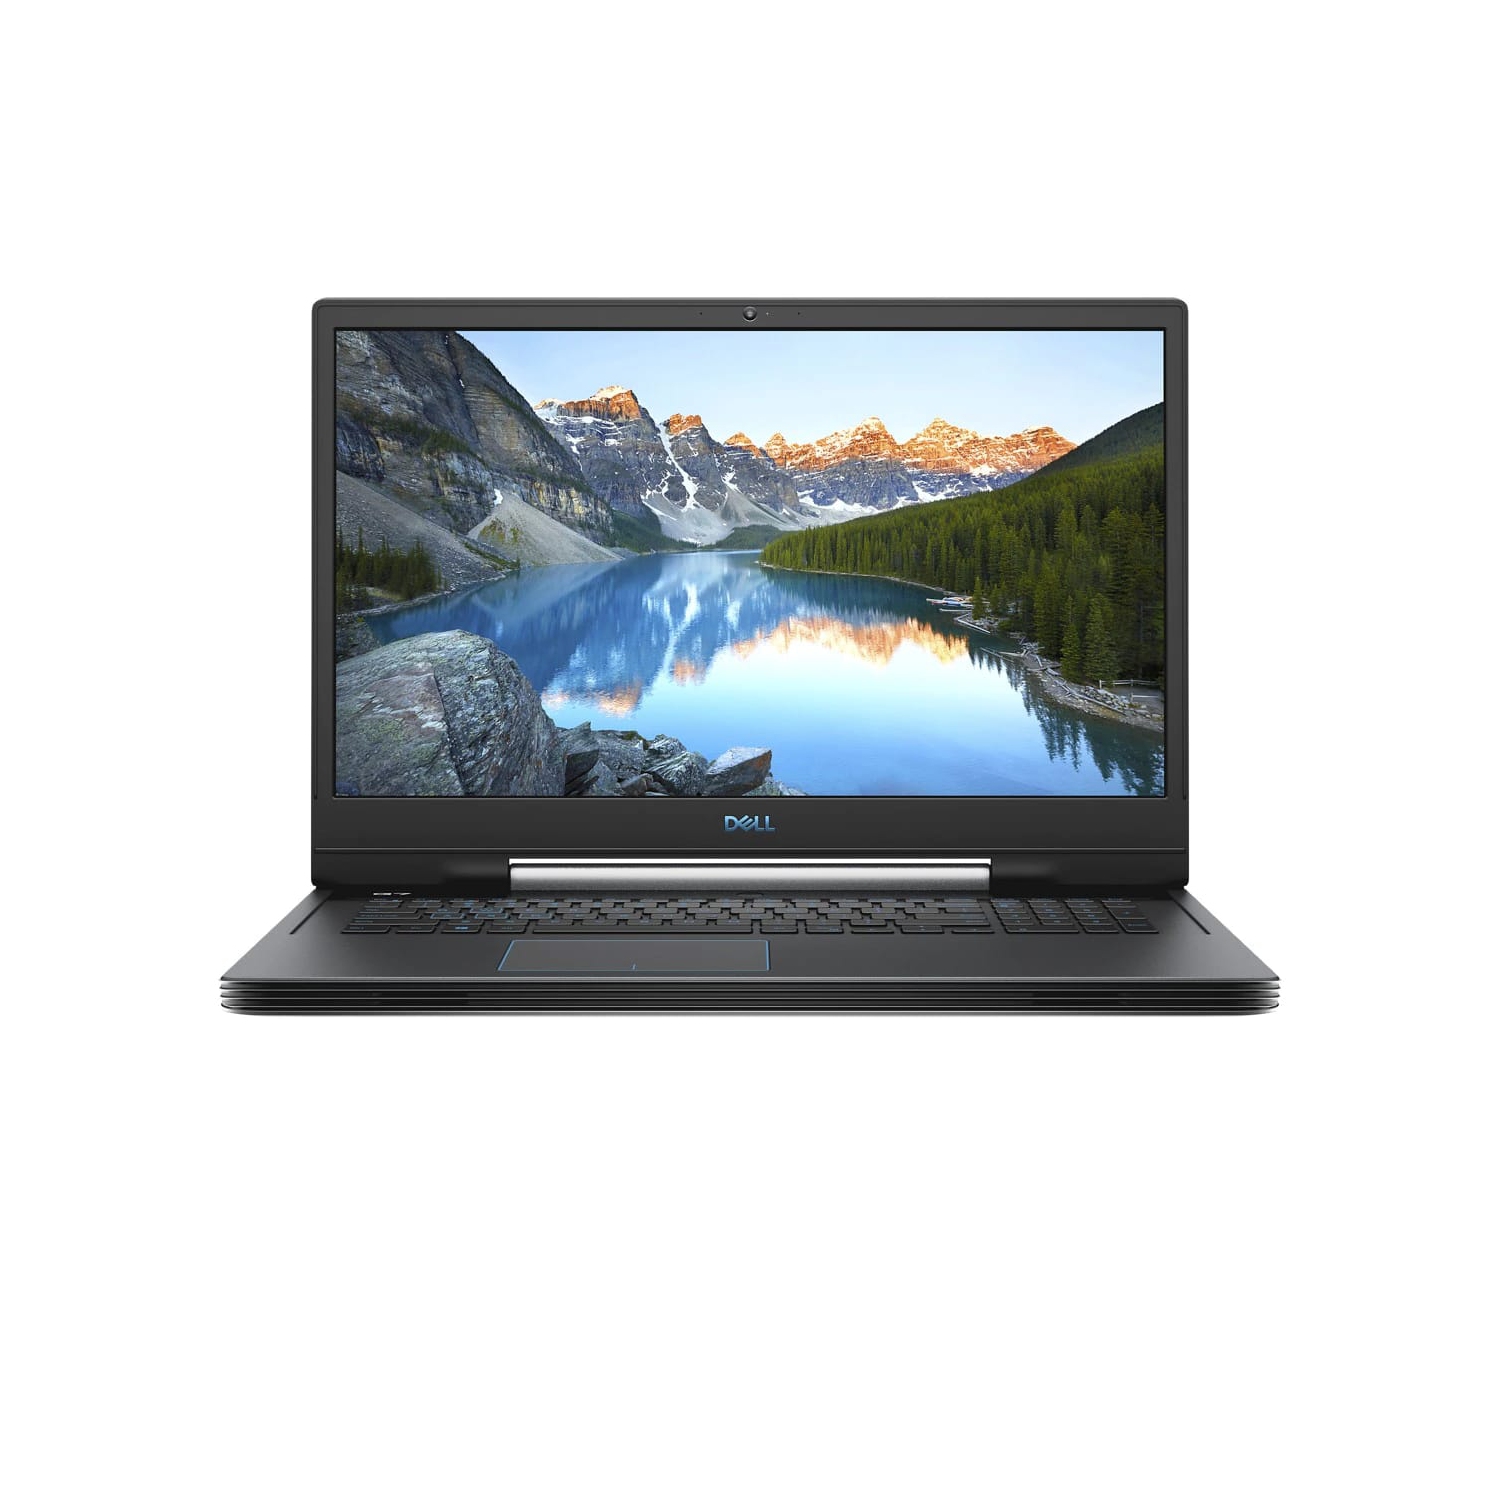 Refurbished (Excellent) – Dell G7 7790 Gaming Laptop (2019) | 17.3" FHD | Core i7 - 256GB SSD + 1TB HDD - 16GB RAM | 6 Cores @ 4.5 GHz